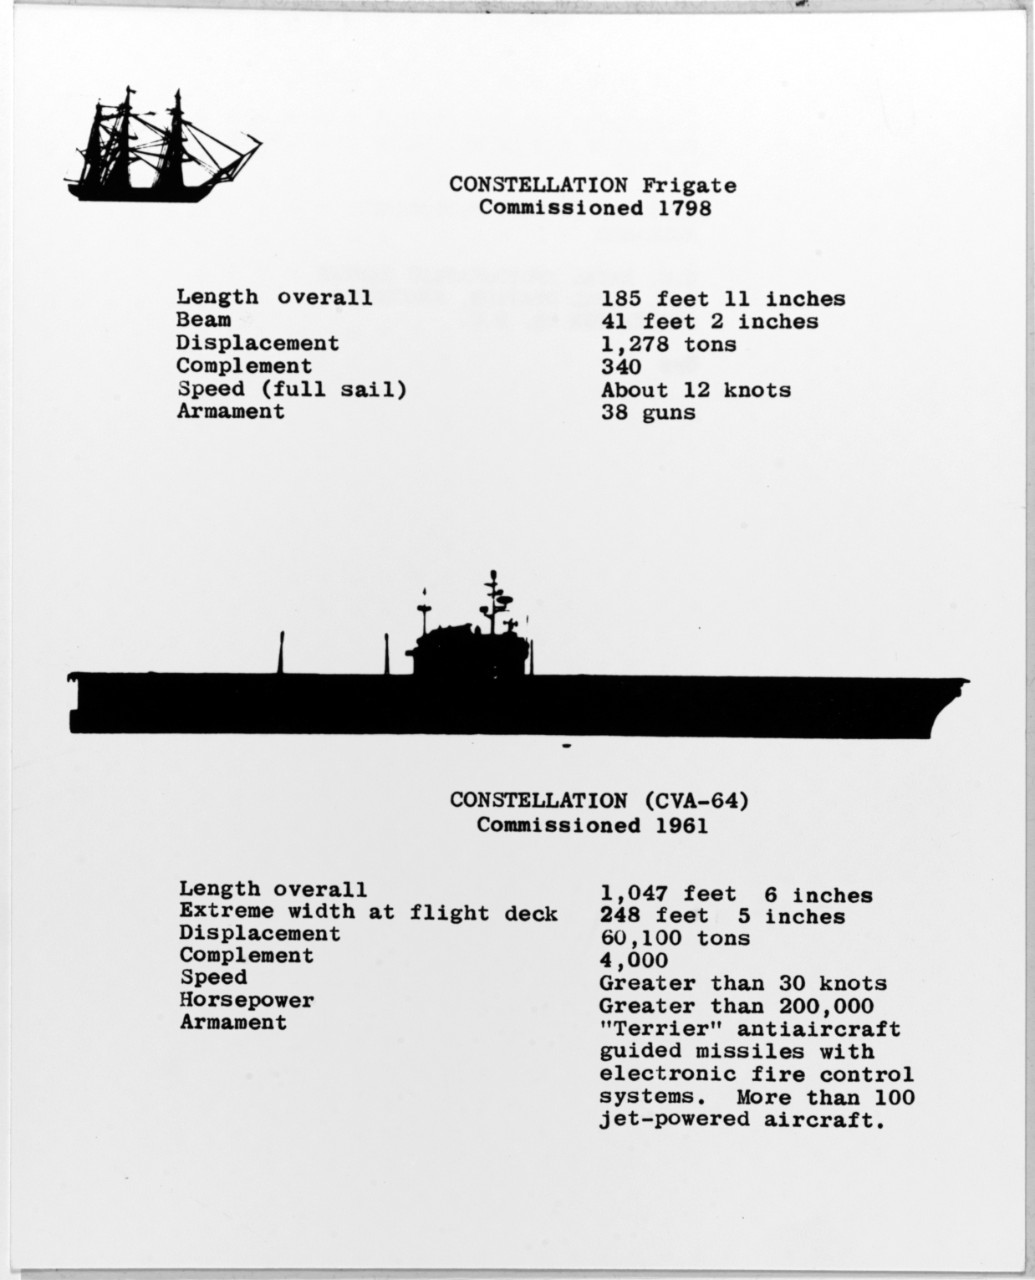 Silhouette and statistical comparison of the first and latest ship named CONSTELLATION